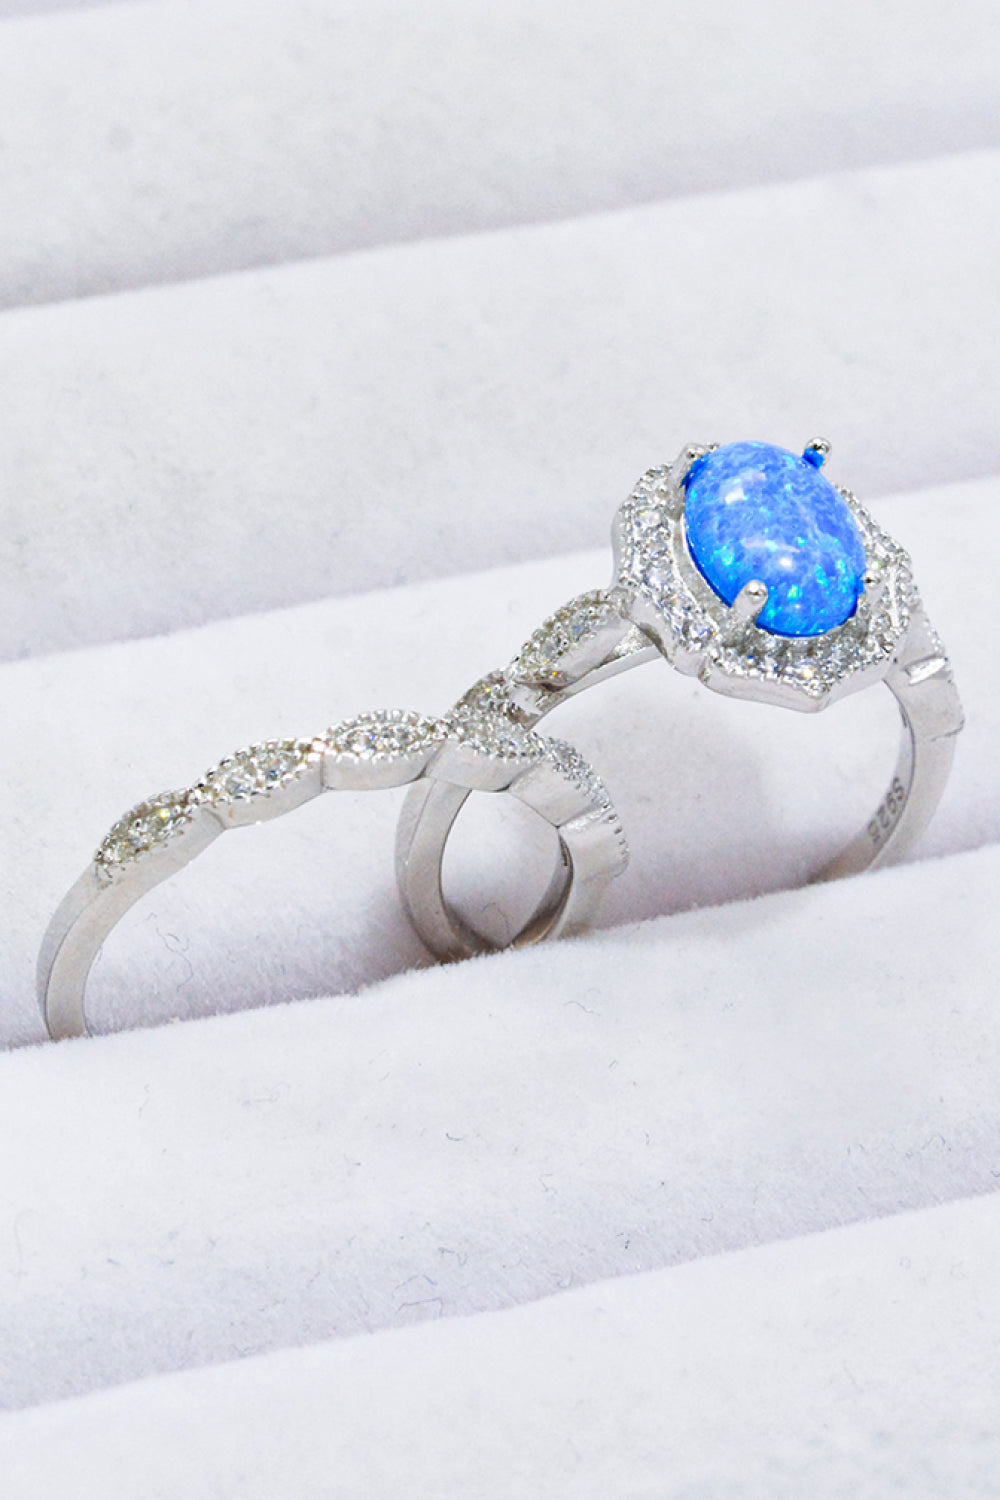 2-Piece 925 Sterling Silver Opal Ring Set - Tophatter Shopping Deals - Electronics, Jewelry, Auction, App, Bidding, Gadgets, Fashion